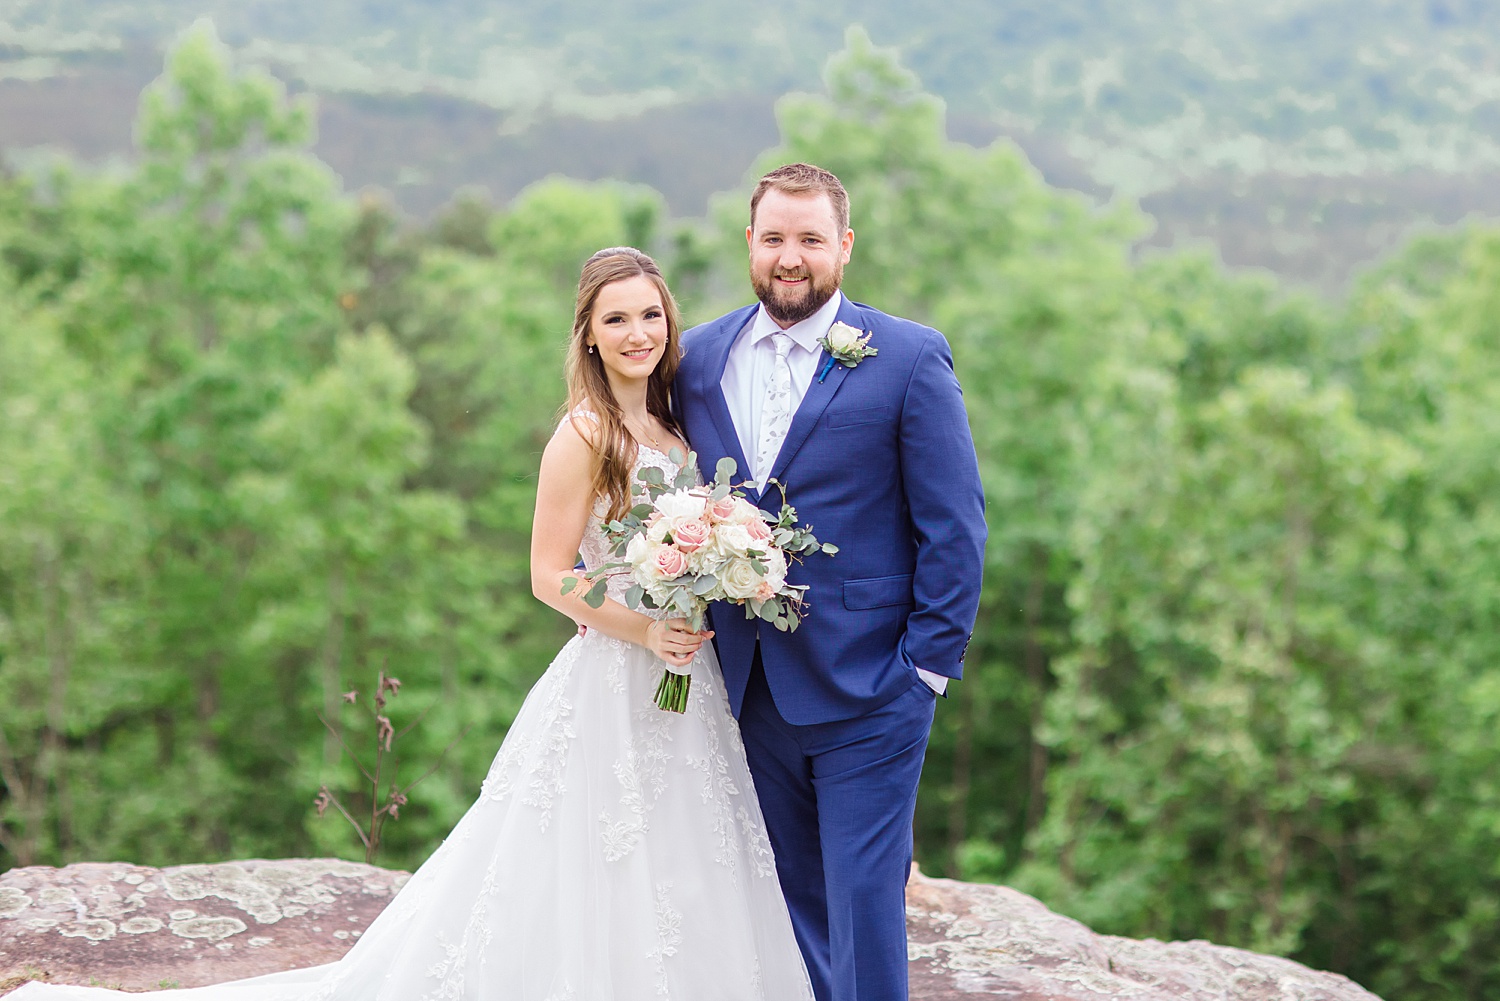 wedding portraits of couple before romantic spring wedding at Weddings at Cabin Bluff in AL 